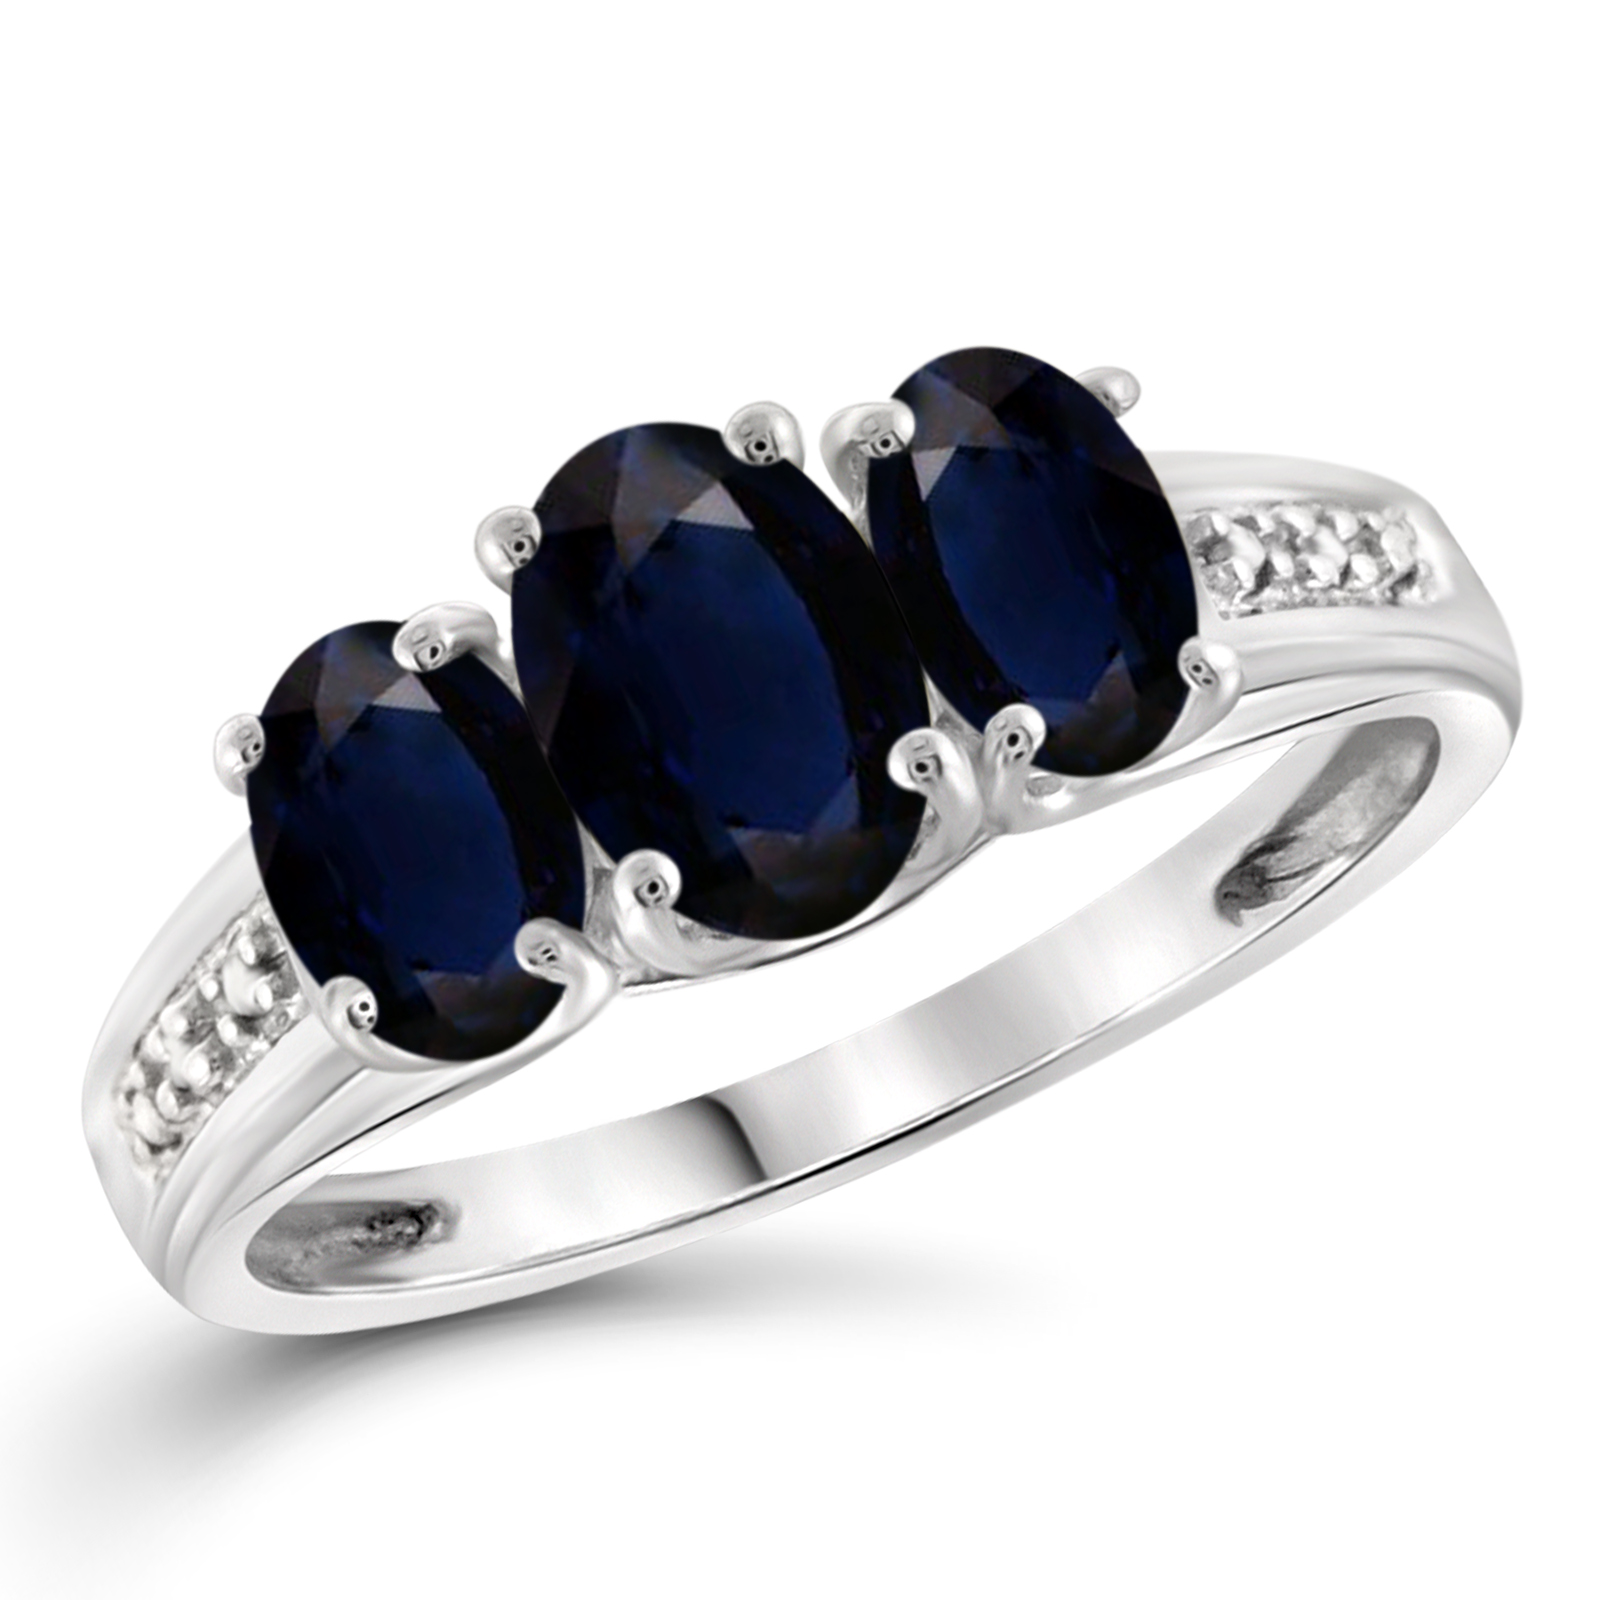 1.68 CTTW Created Sapphire Gemstone & Accent White Diamond Ring In Sterling Silver